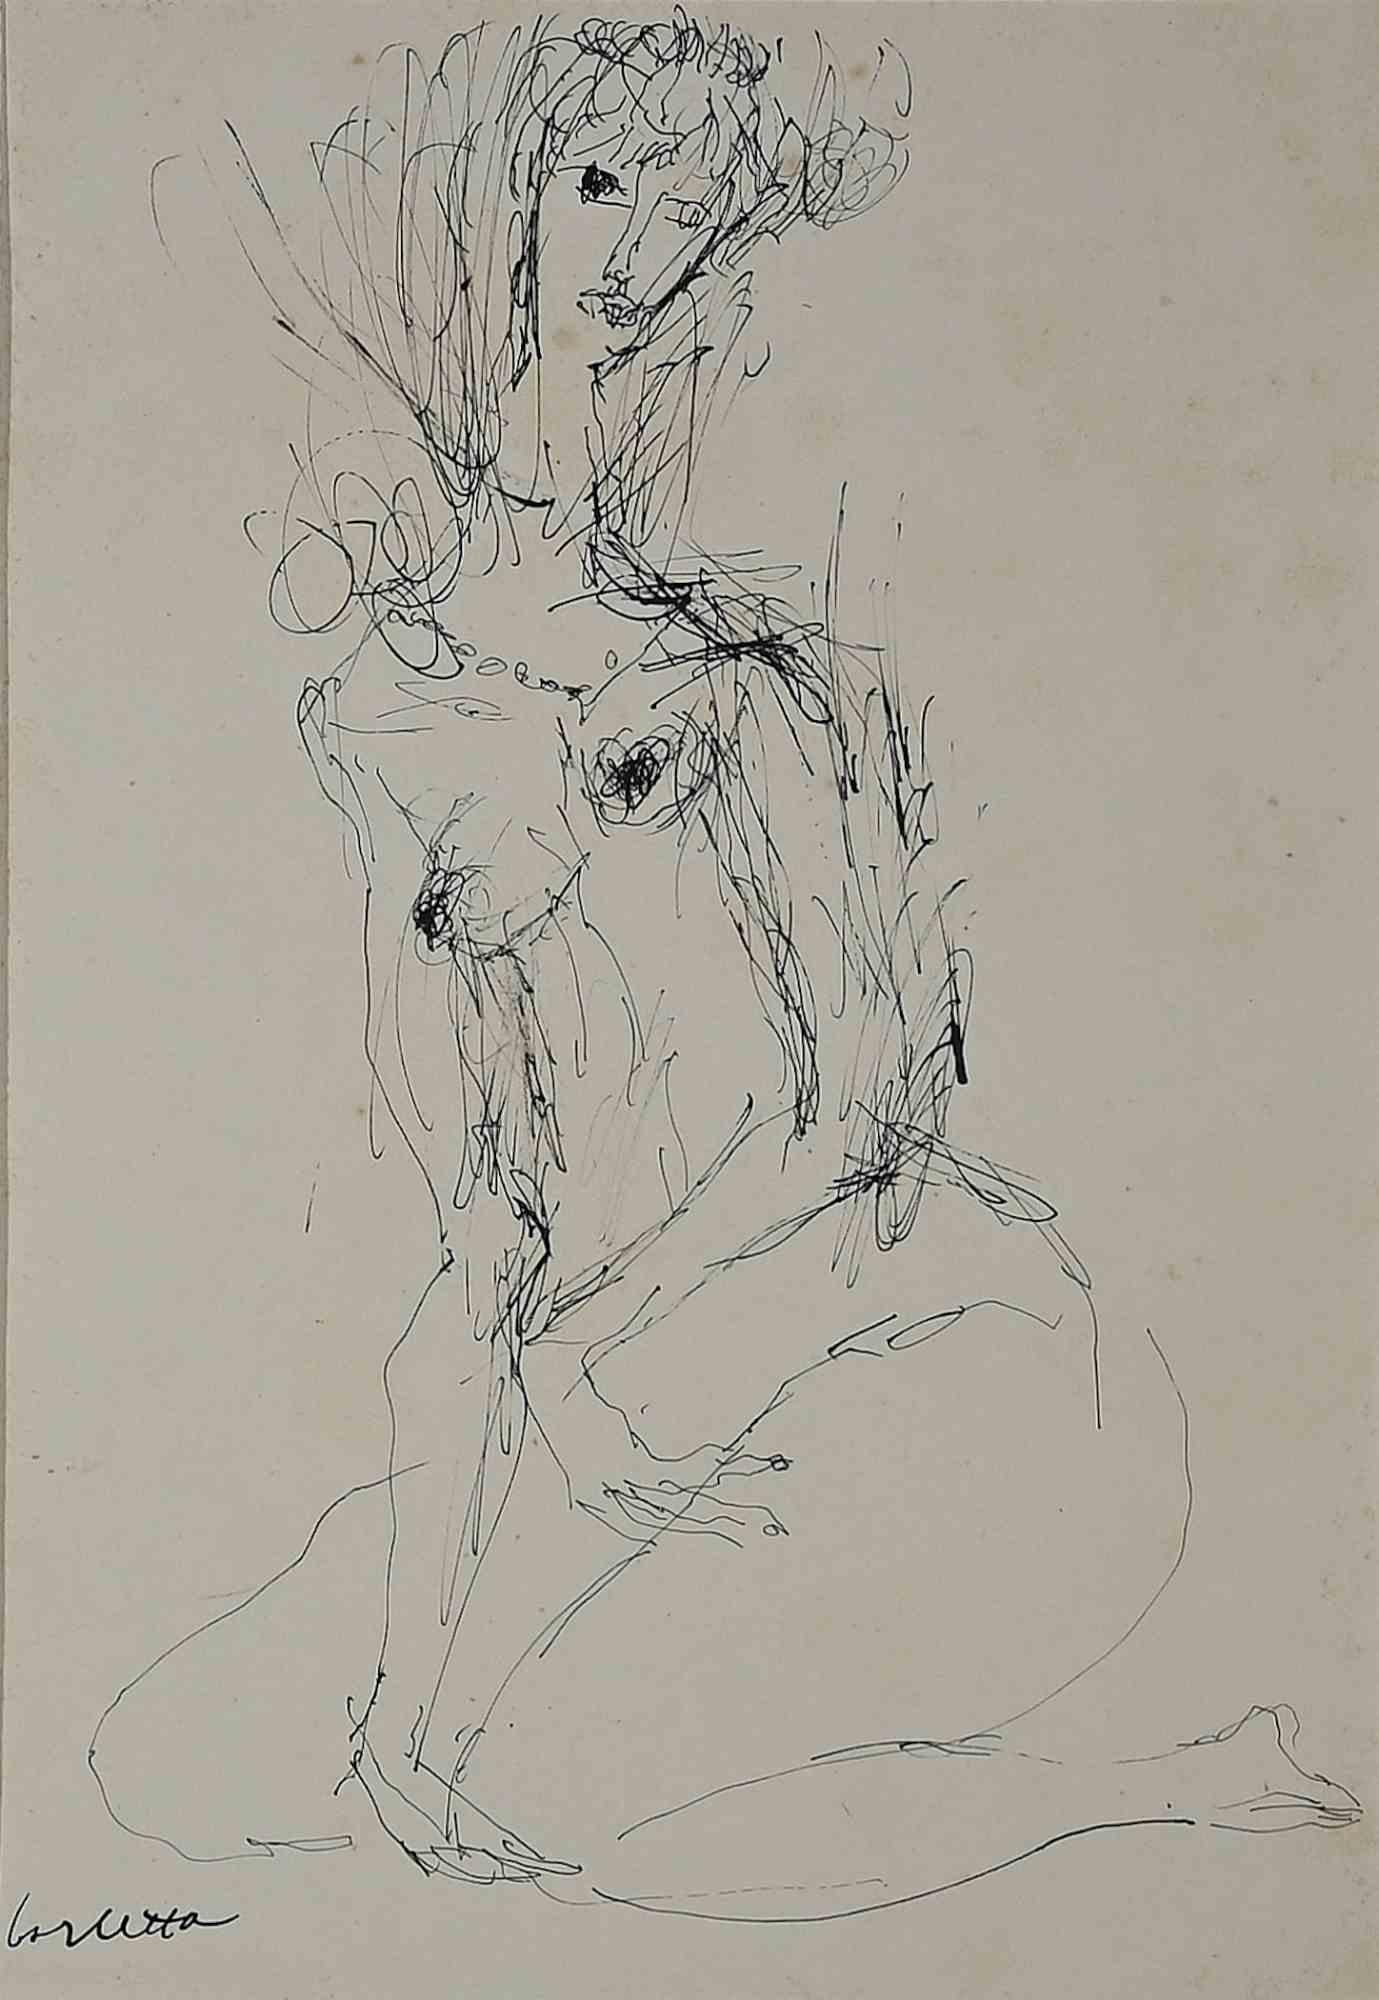 Nude  is an original Pen drawing on paper realized by Sergio Barletta in The 1970s.

Good conditions.

Hand-Signed.

Sergio Barletta (1934) is an Italian cartoonist and illustrator, who has also published some humorous and political satire